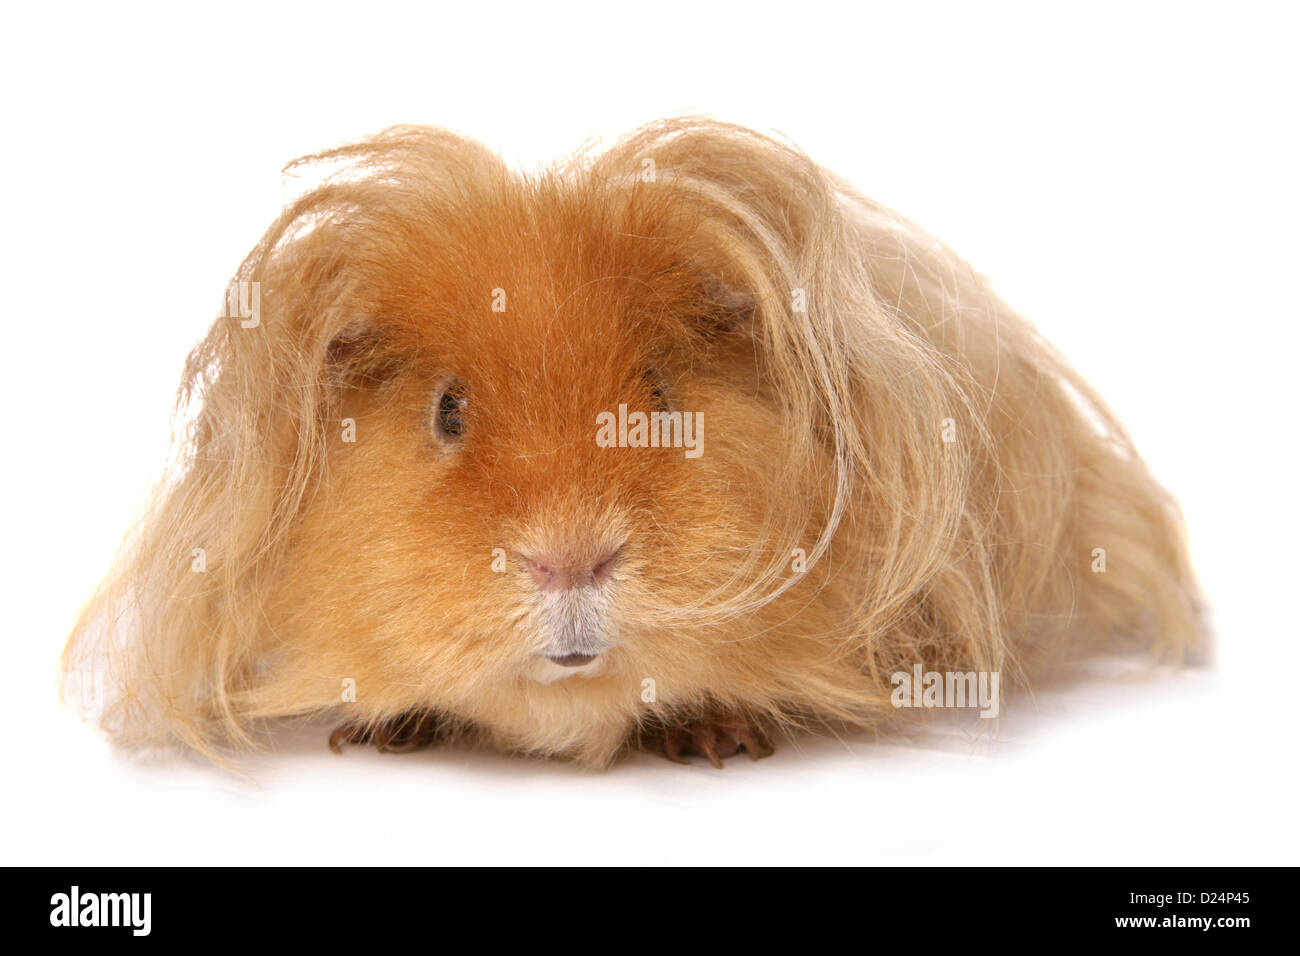 Domestic Guinea Pig Cavia Porcellus Adult With Long Hair Standing Stock Photo Alamy